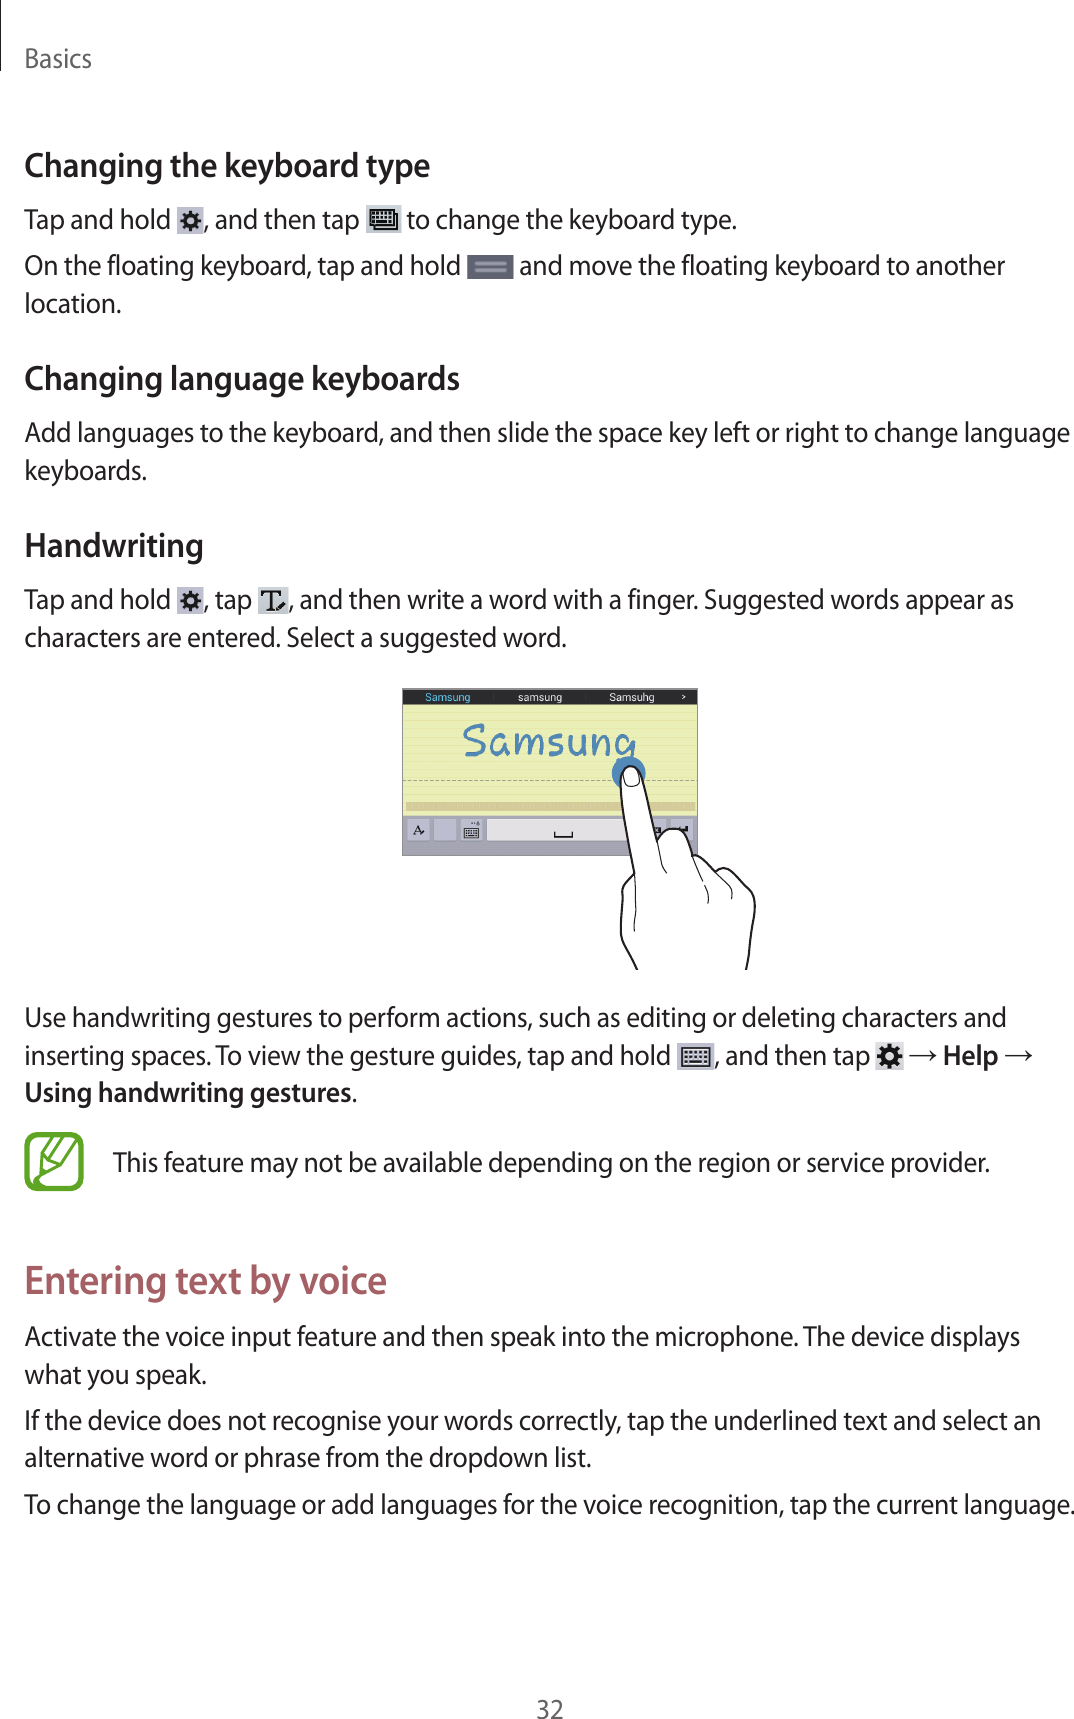 Basics32Changing the keyboard typeTap and hold  , and then tap   to change the keyboard type.On the floating keyboard, tap and hold   and move the floating keyboard to another location.Changing language keyboardsAdd languages to the keyboard, and then slide the space key left or right to change language keyboards.HandwritingTap and hold  , tap  , and then write a word with a finger. Suggested words appear as characters are entered. Select a suggested word.Use handwriting gestures to perform actions, such as editing or deleting characters and inserting spaces. To view the gesture guides, tap and hold  , and then tap   → Help → Using handwriting gestures.This feature may not be available depending on the region or service provider.Entering text by voiceActivate the voice input feature and then speak into the microphone. The device displays what you speak.If the device does not recognise your words correctly, tap the underlined text and select an alternative word or phrase from the dropdown list.To change the language or add languages for the voice recognition, tap the current language.